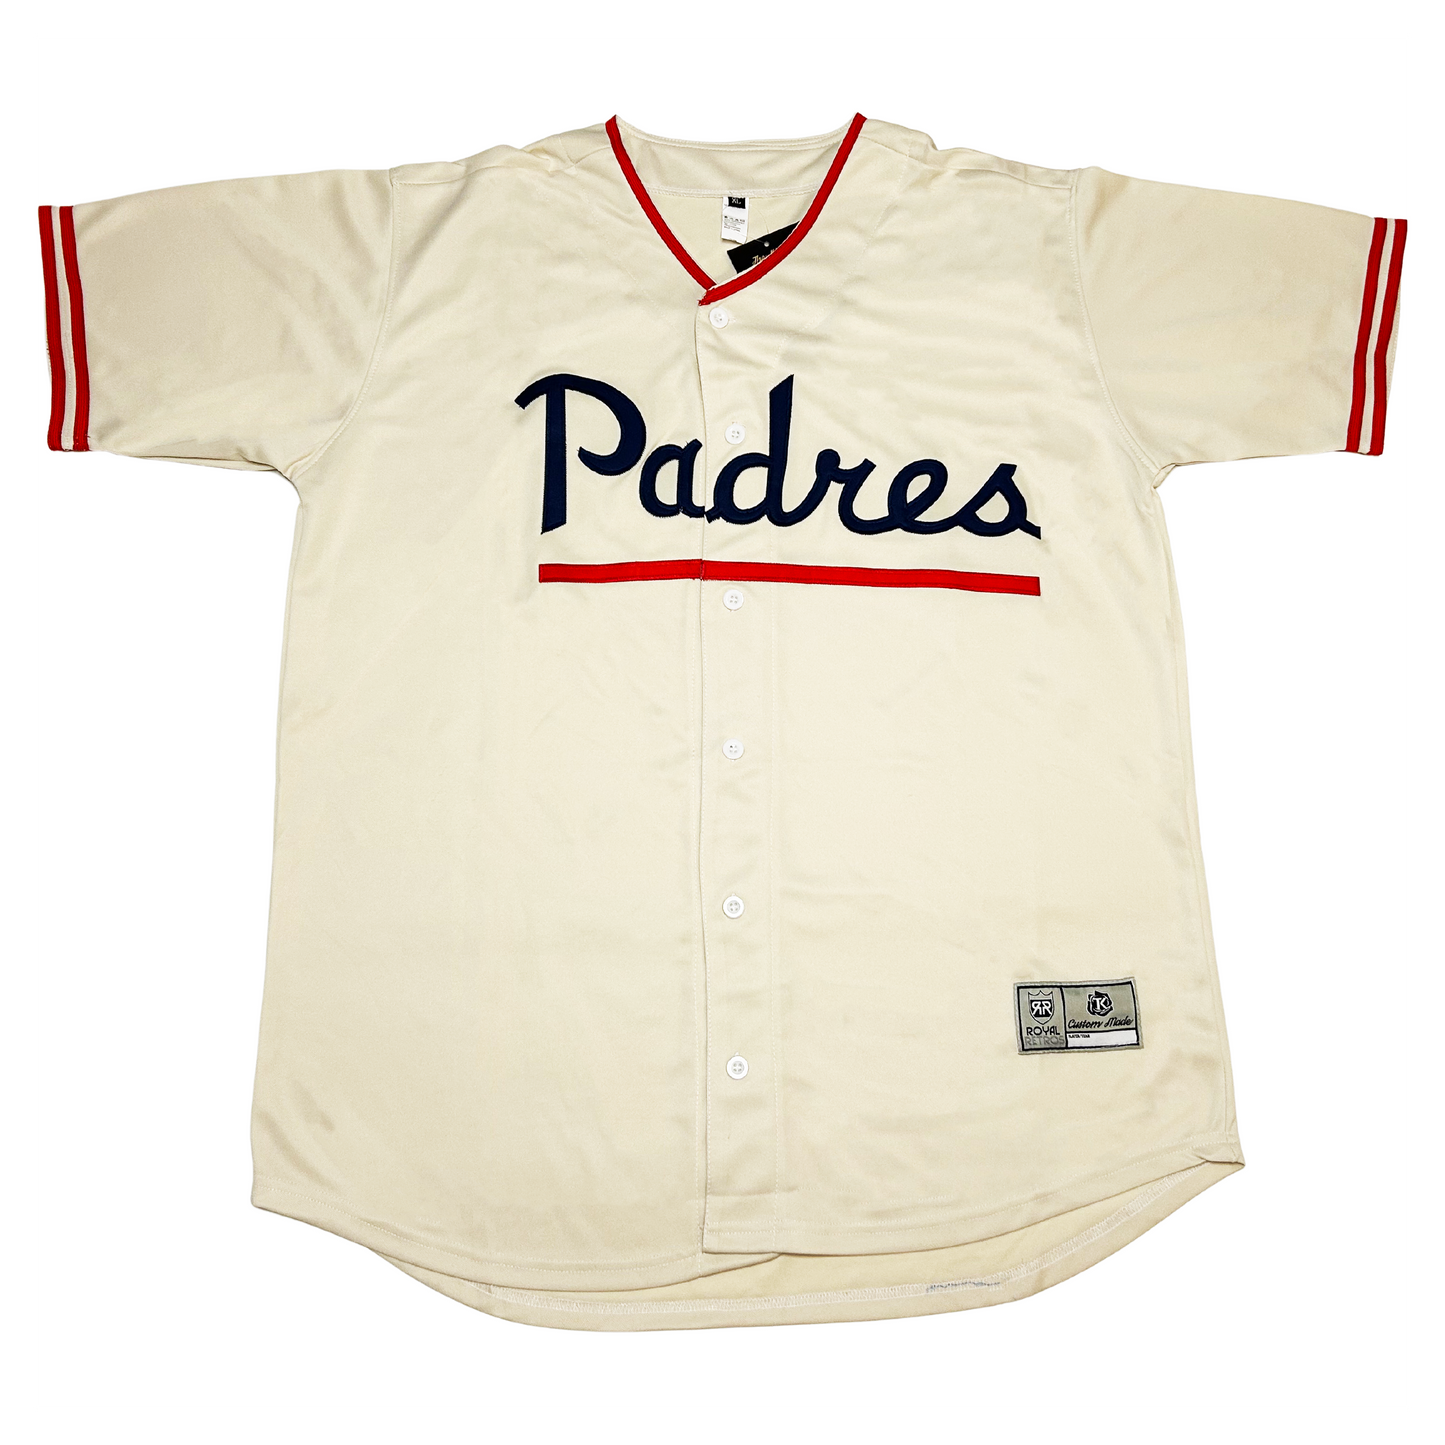 PCL Padres Home Jersey